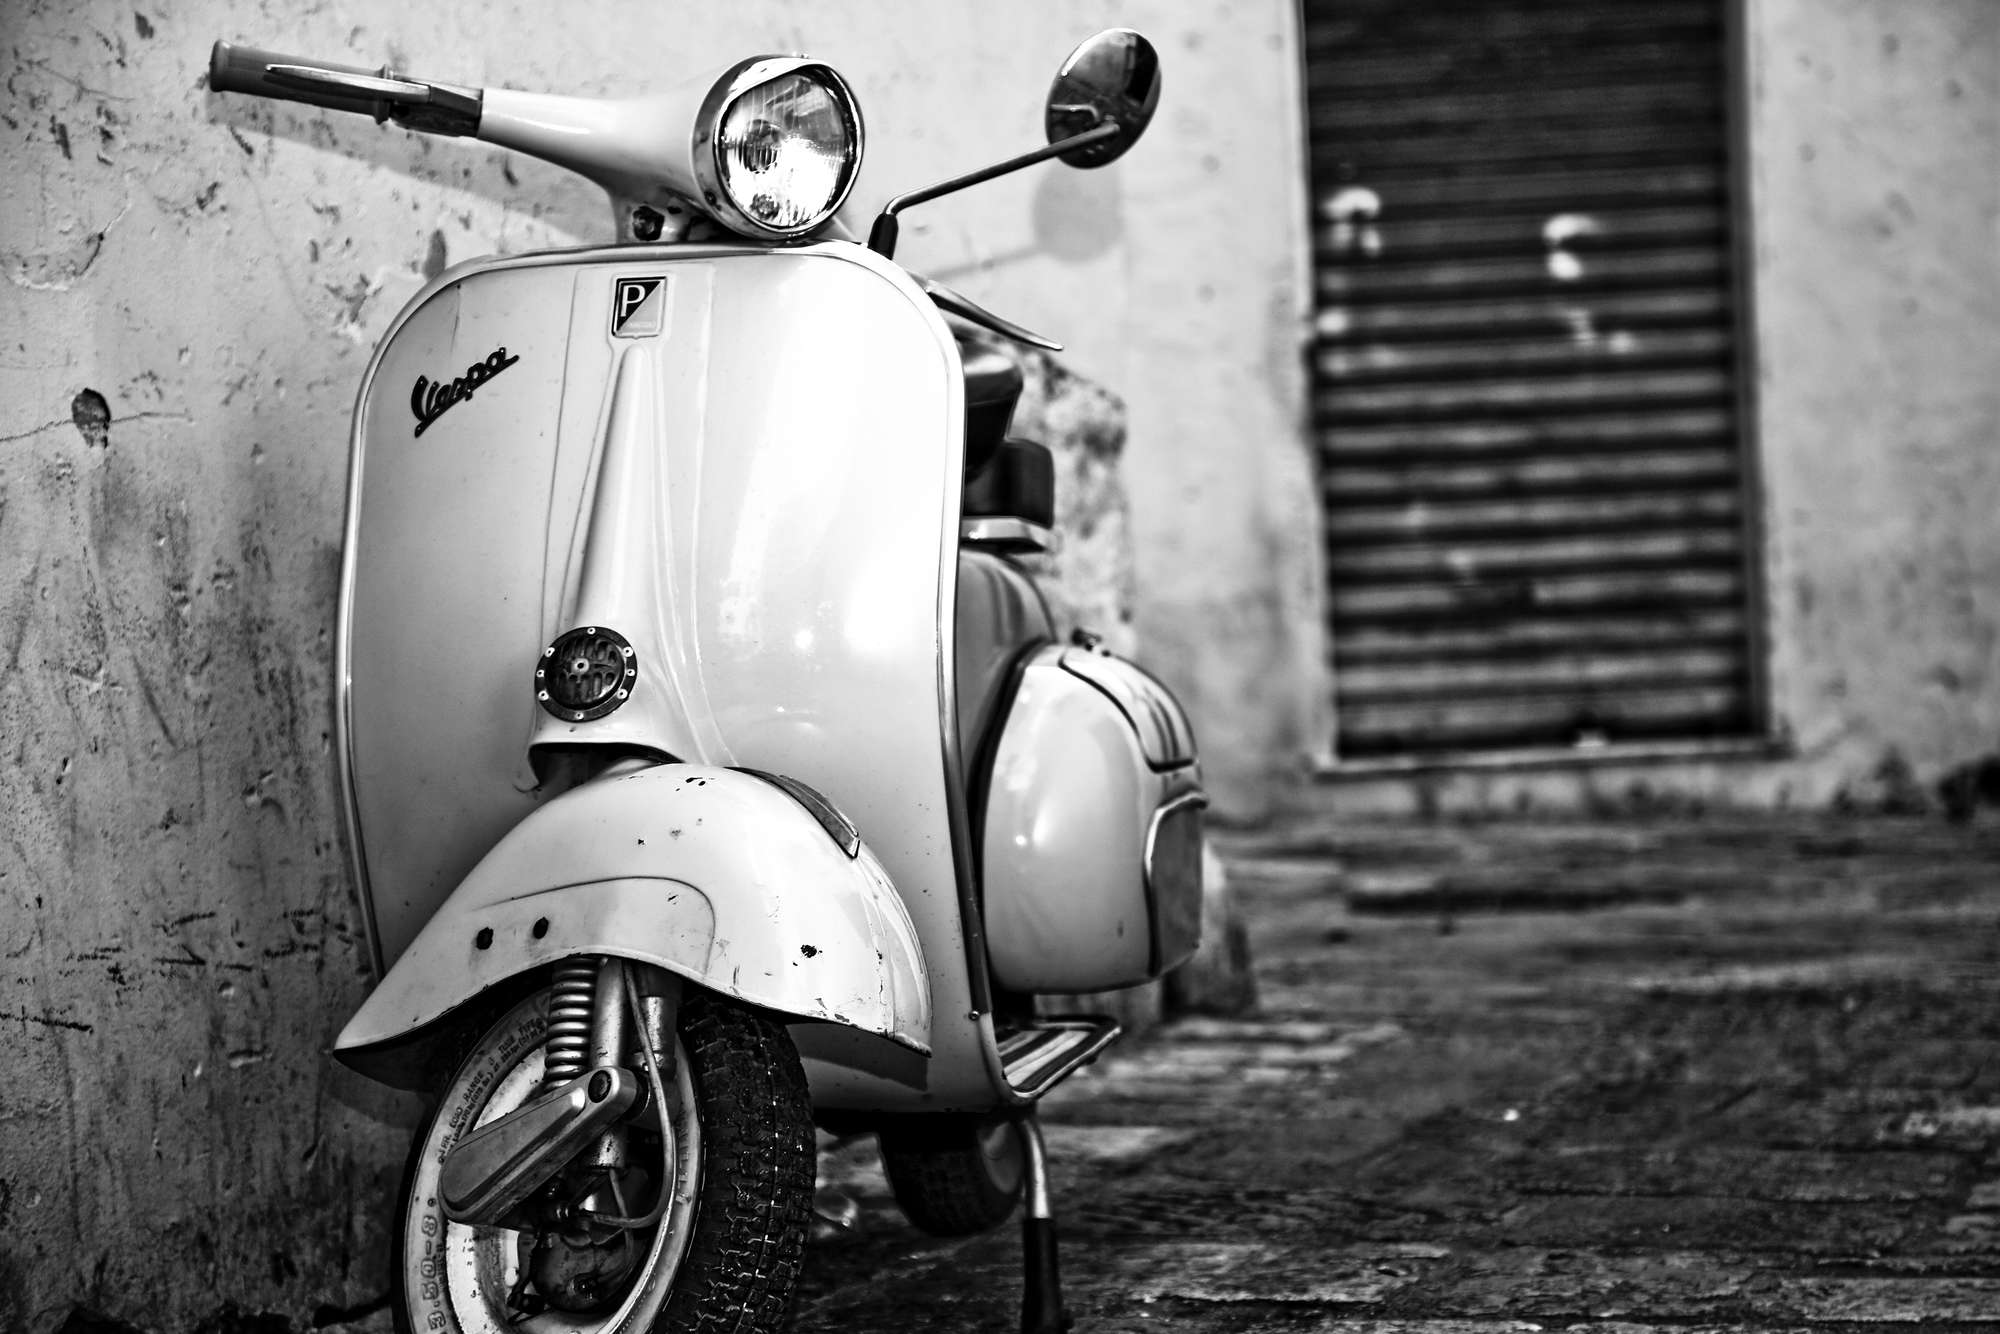             City mural Vespa scooter motif on mother of pearl smooth nonwoven
        